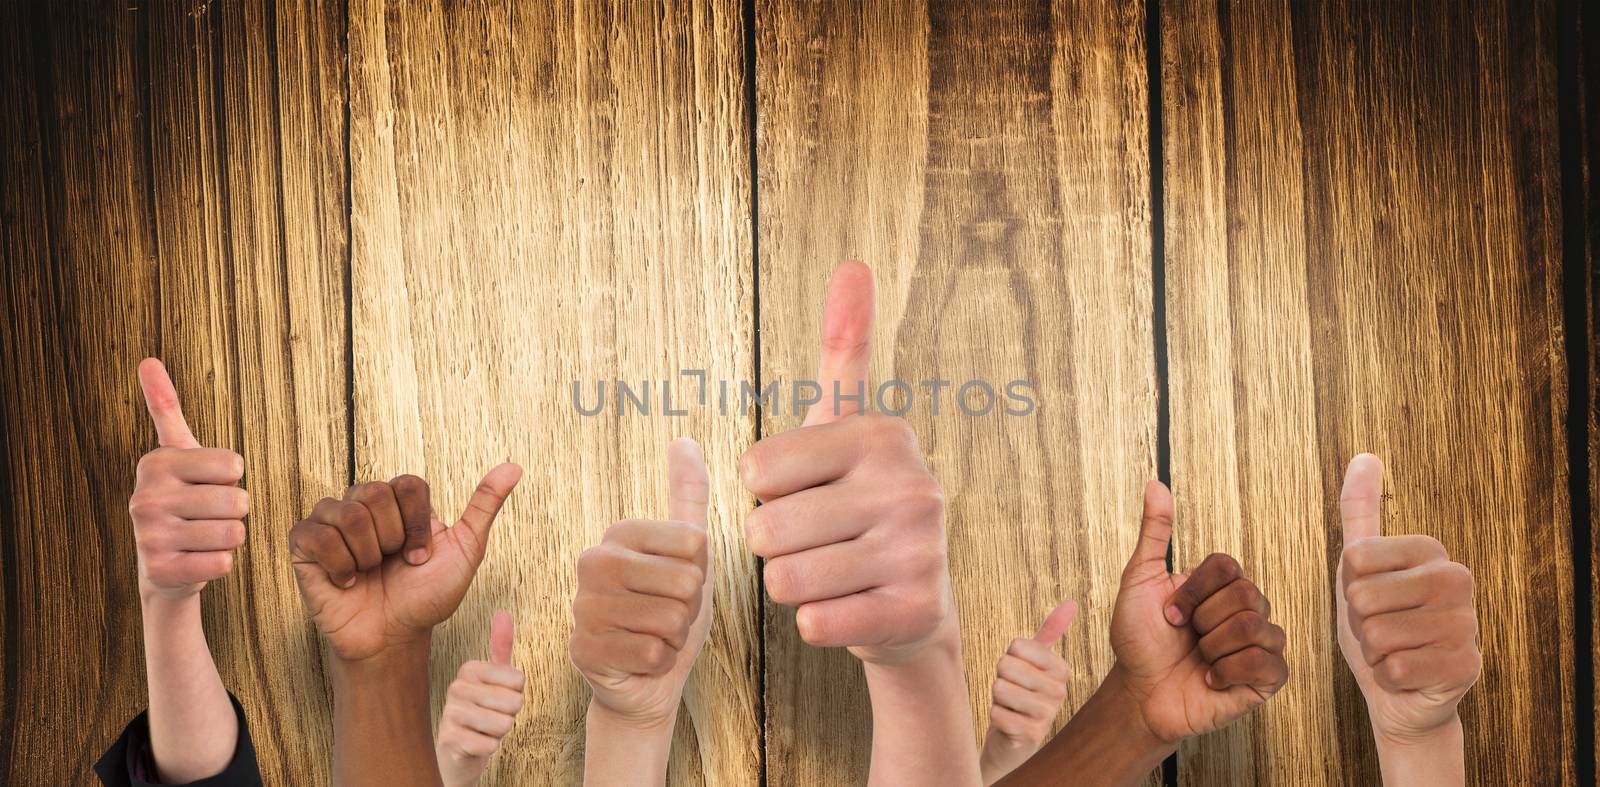 Hands showing thumbs up against wooden table